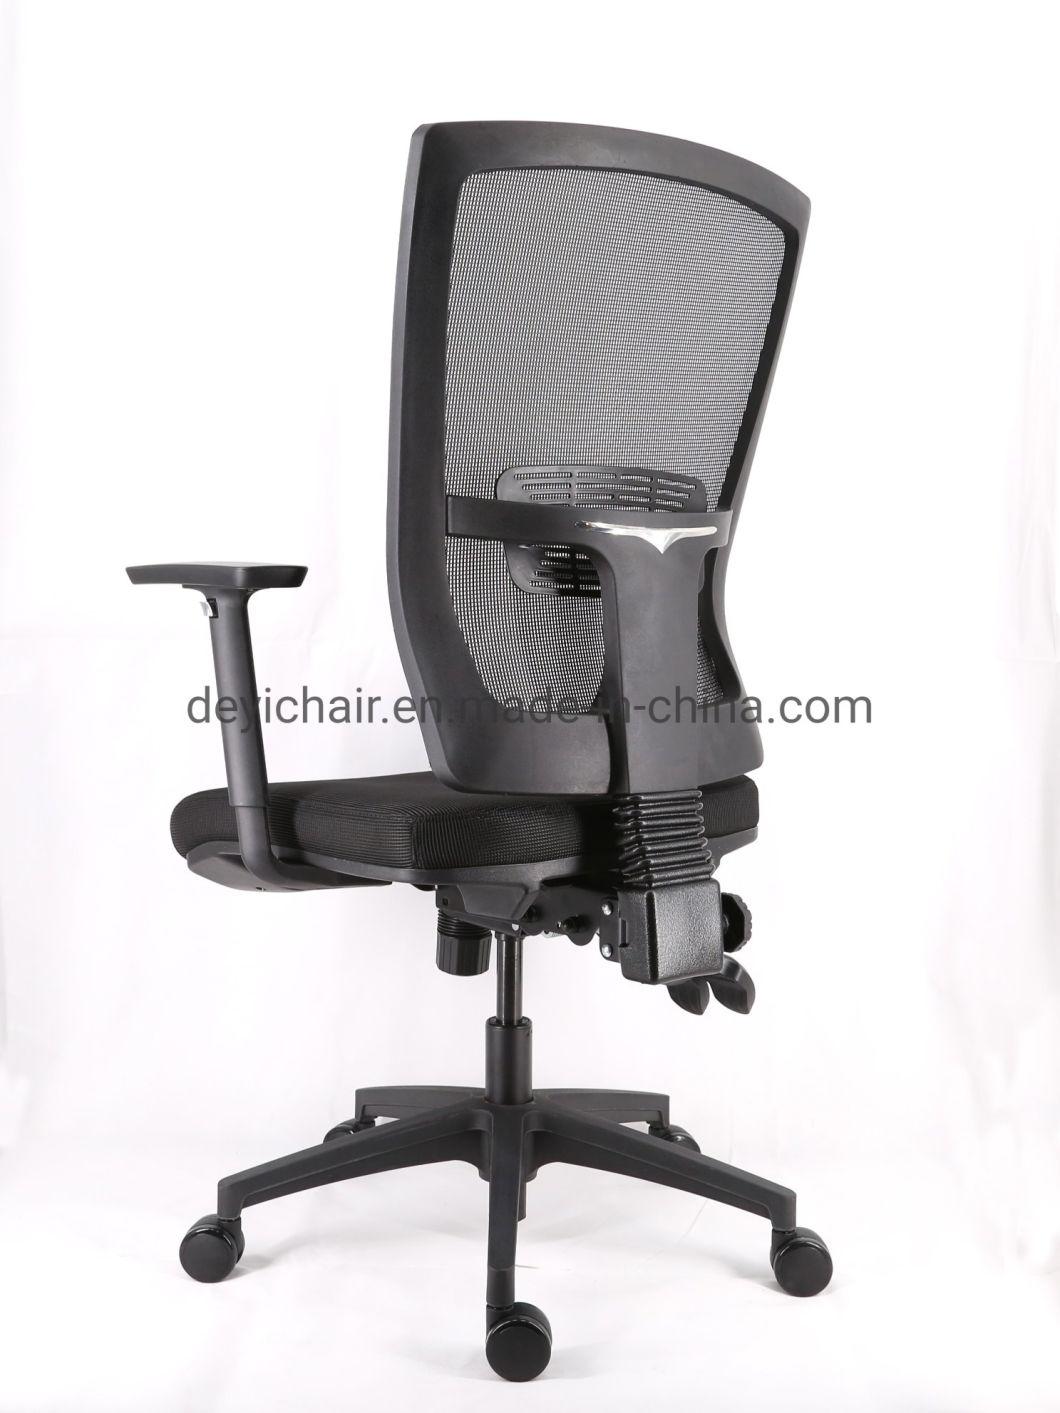 3 Lever Heavy Duty Mechanism Nylon Base and PU Castor with Adjustable Arms and Lumbar Support Chair